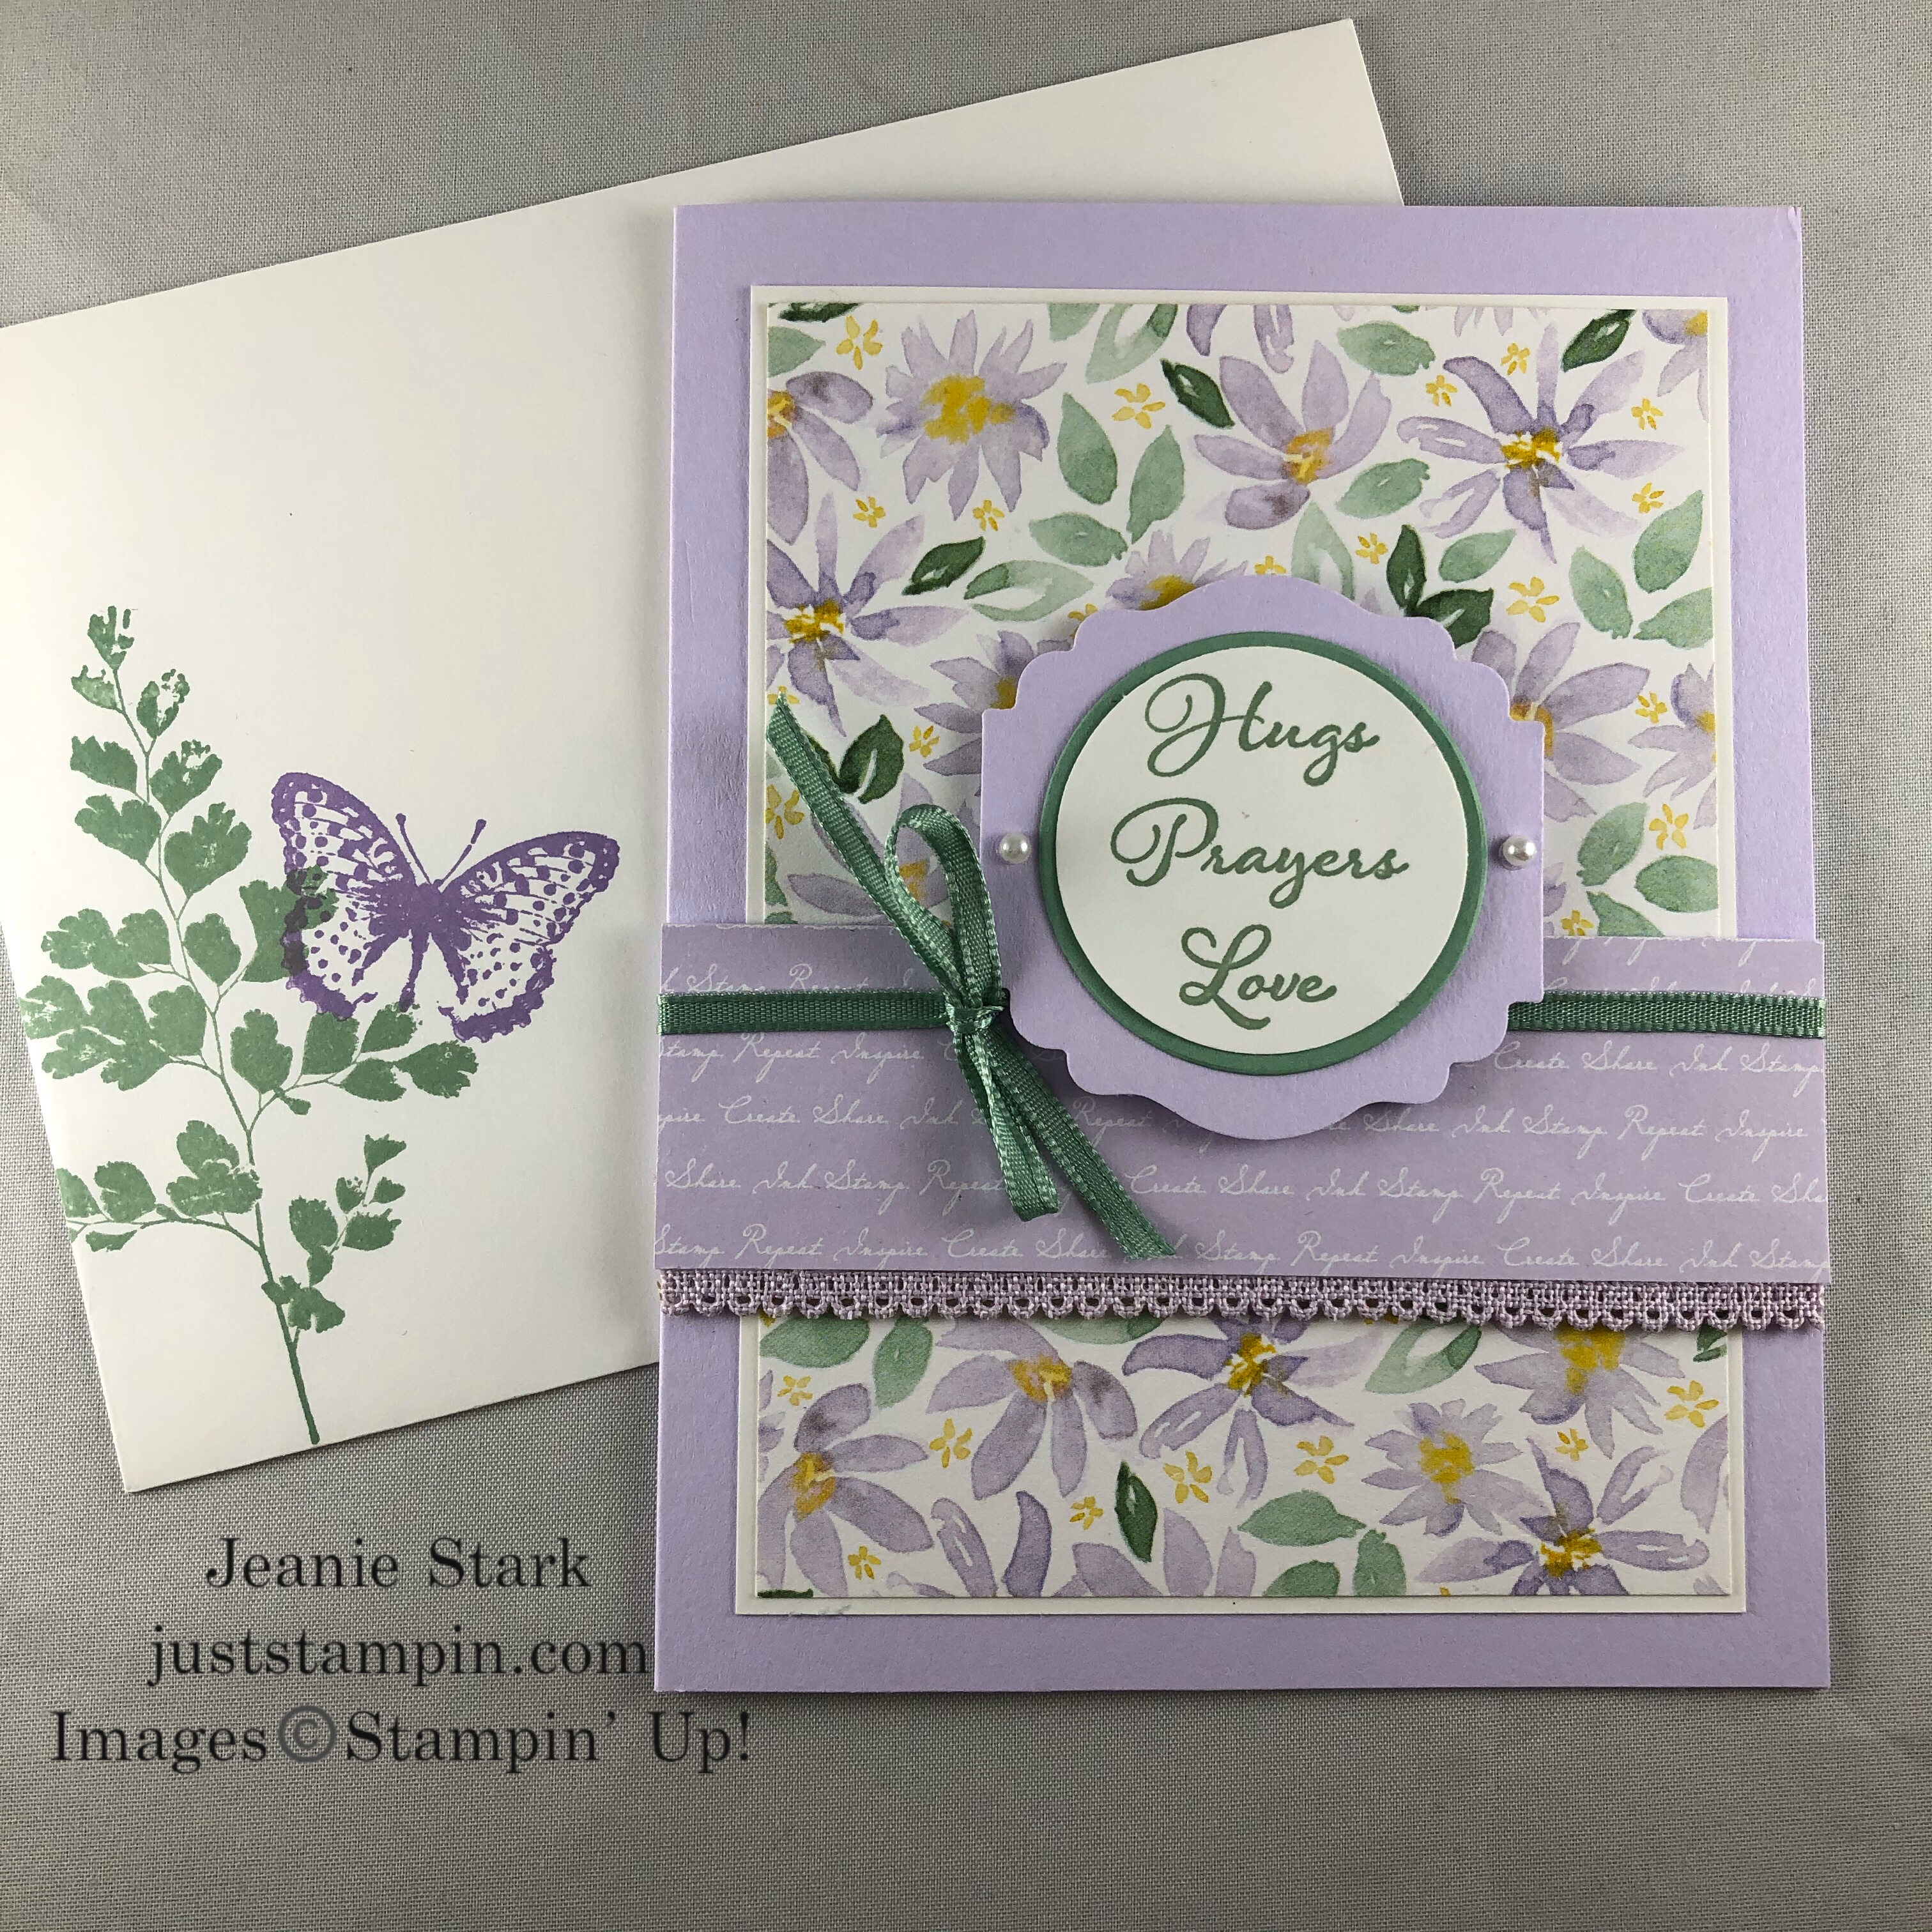 Stampin Up Best Dressed Positive Thoughts card idea for friends and family - Jeanie Stark StampinUp